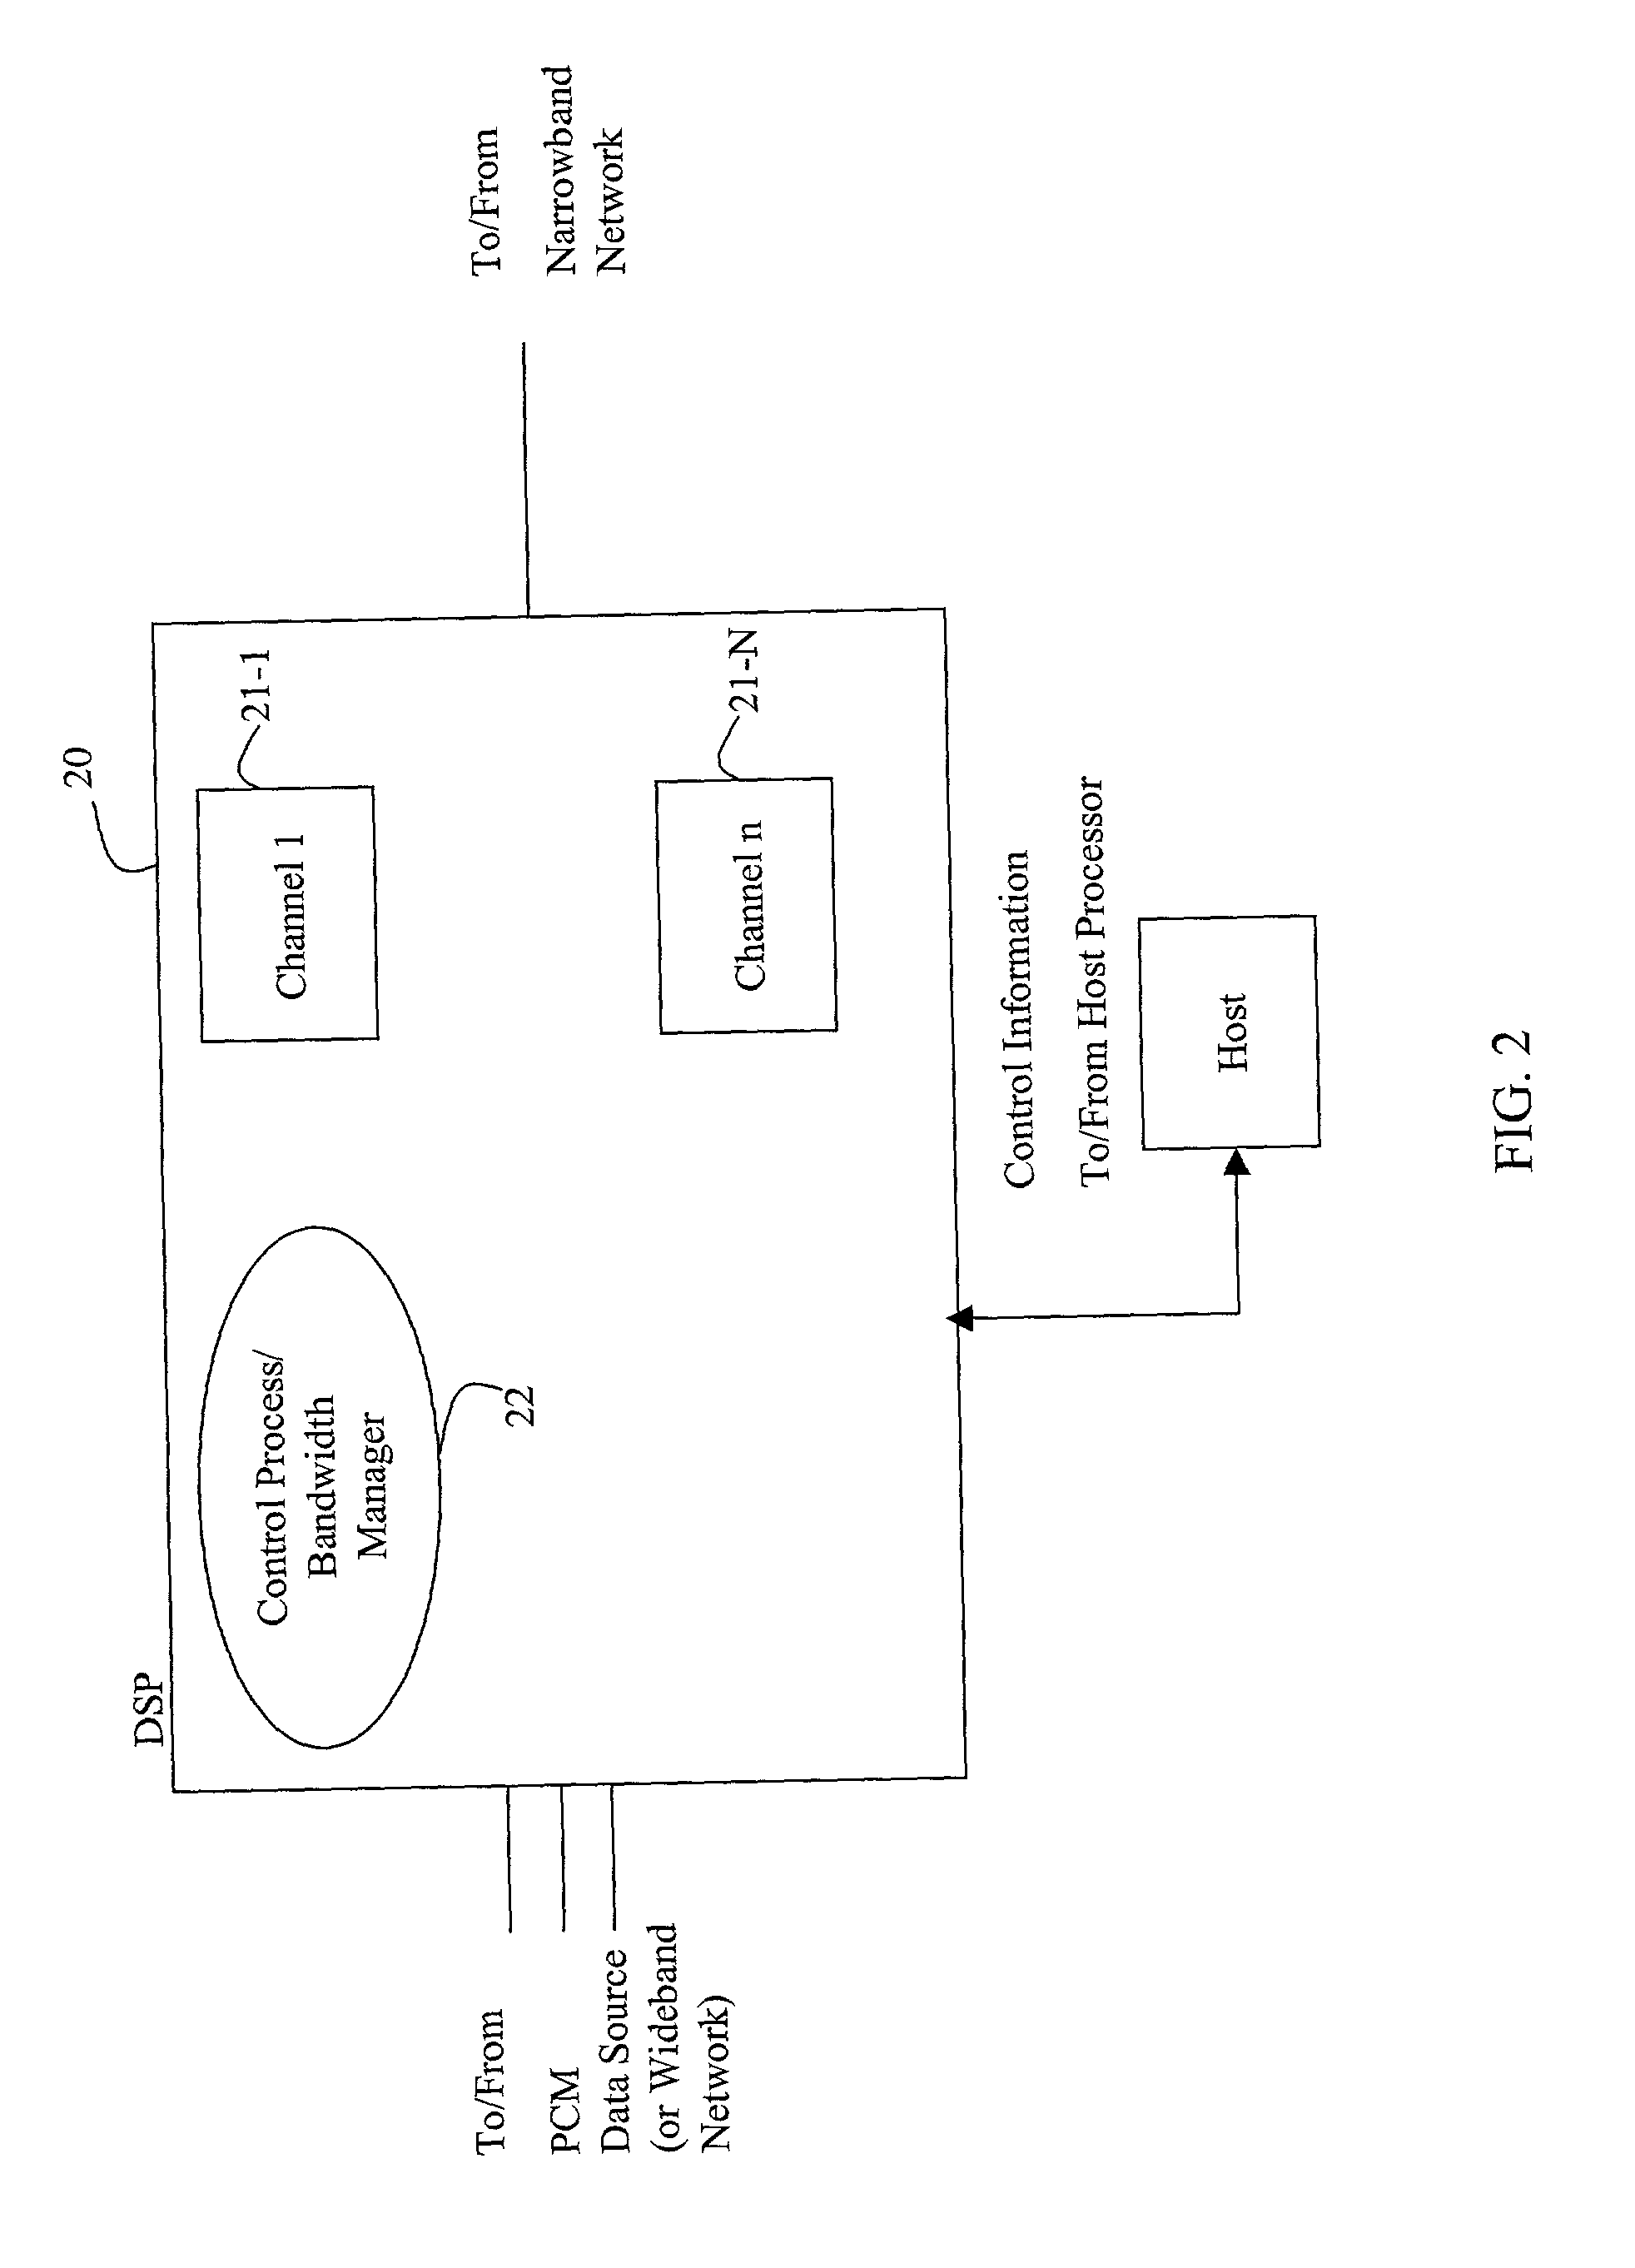 Method and system for optimized facsimile transmission speed over a bandwidth limited network